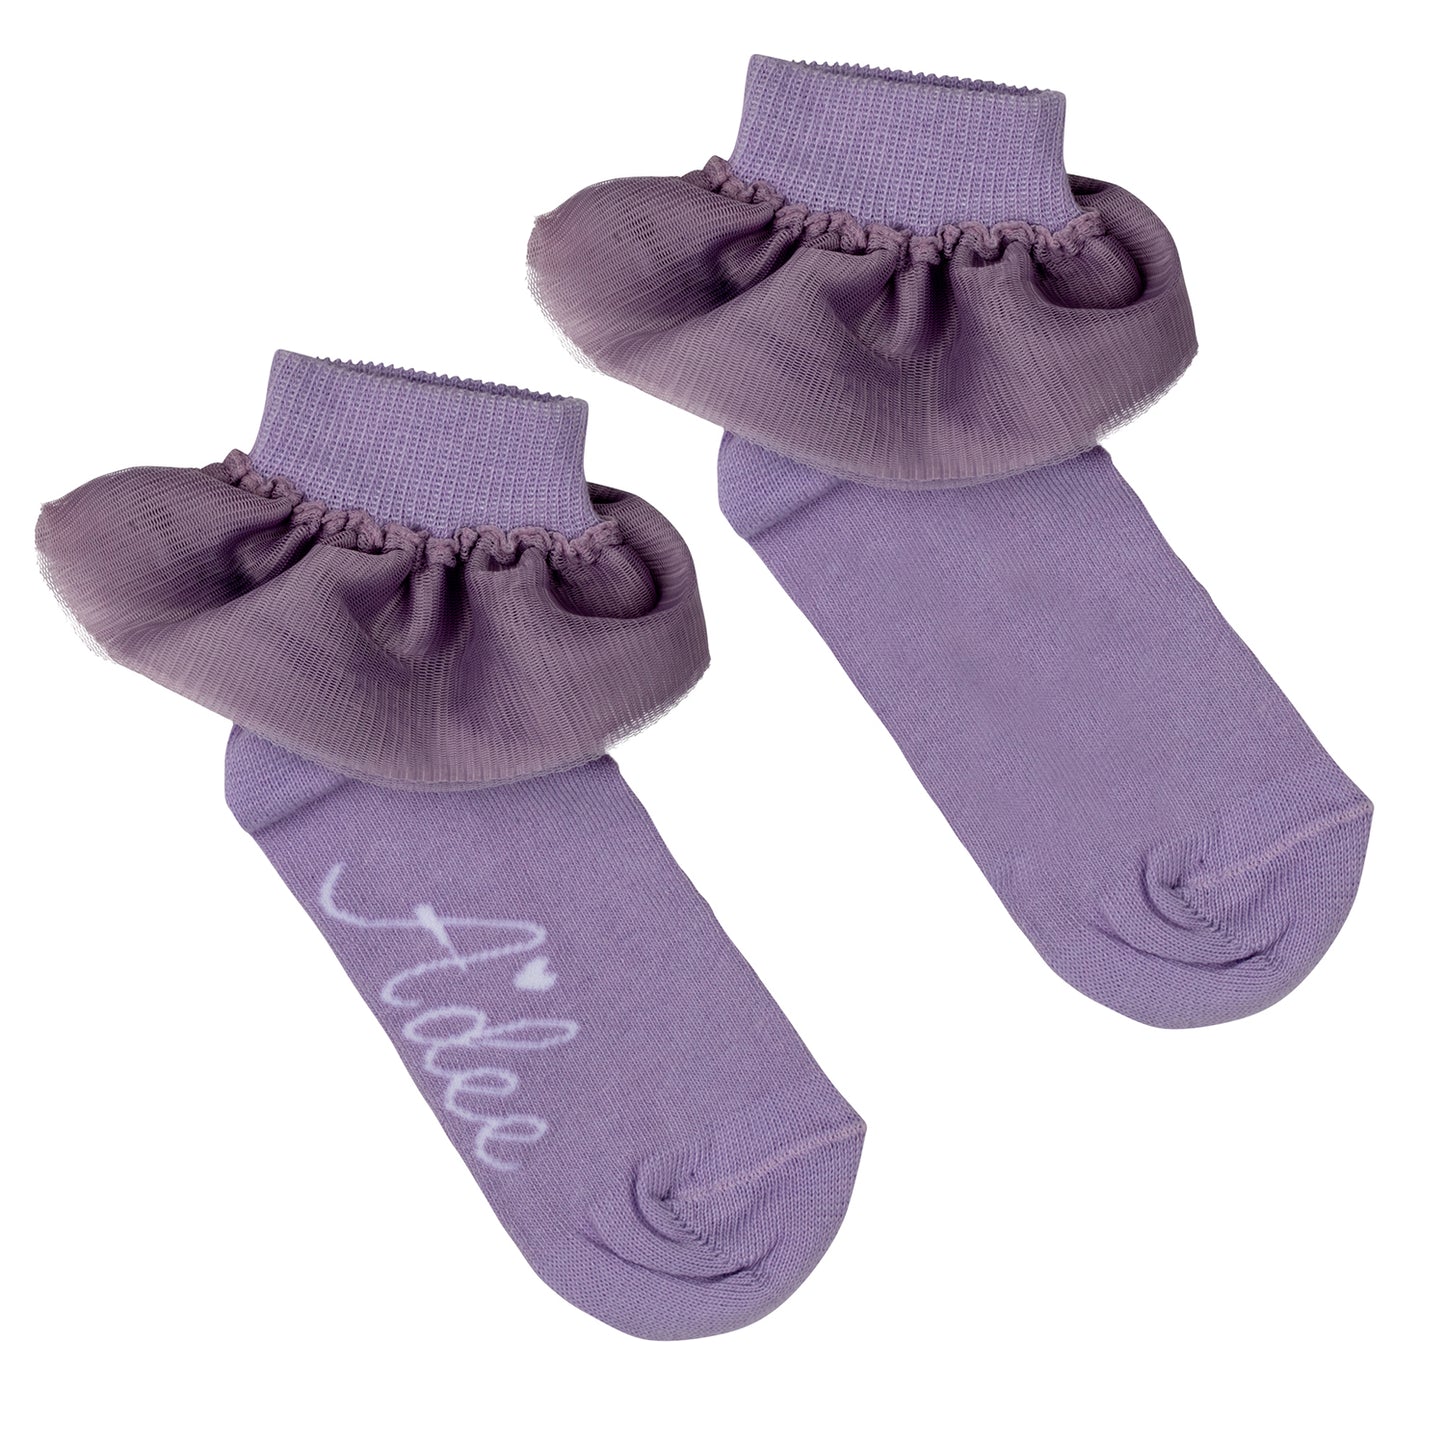 Adee Popping Pastels Ankle Socks